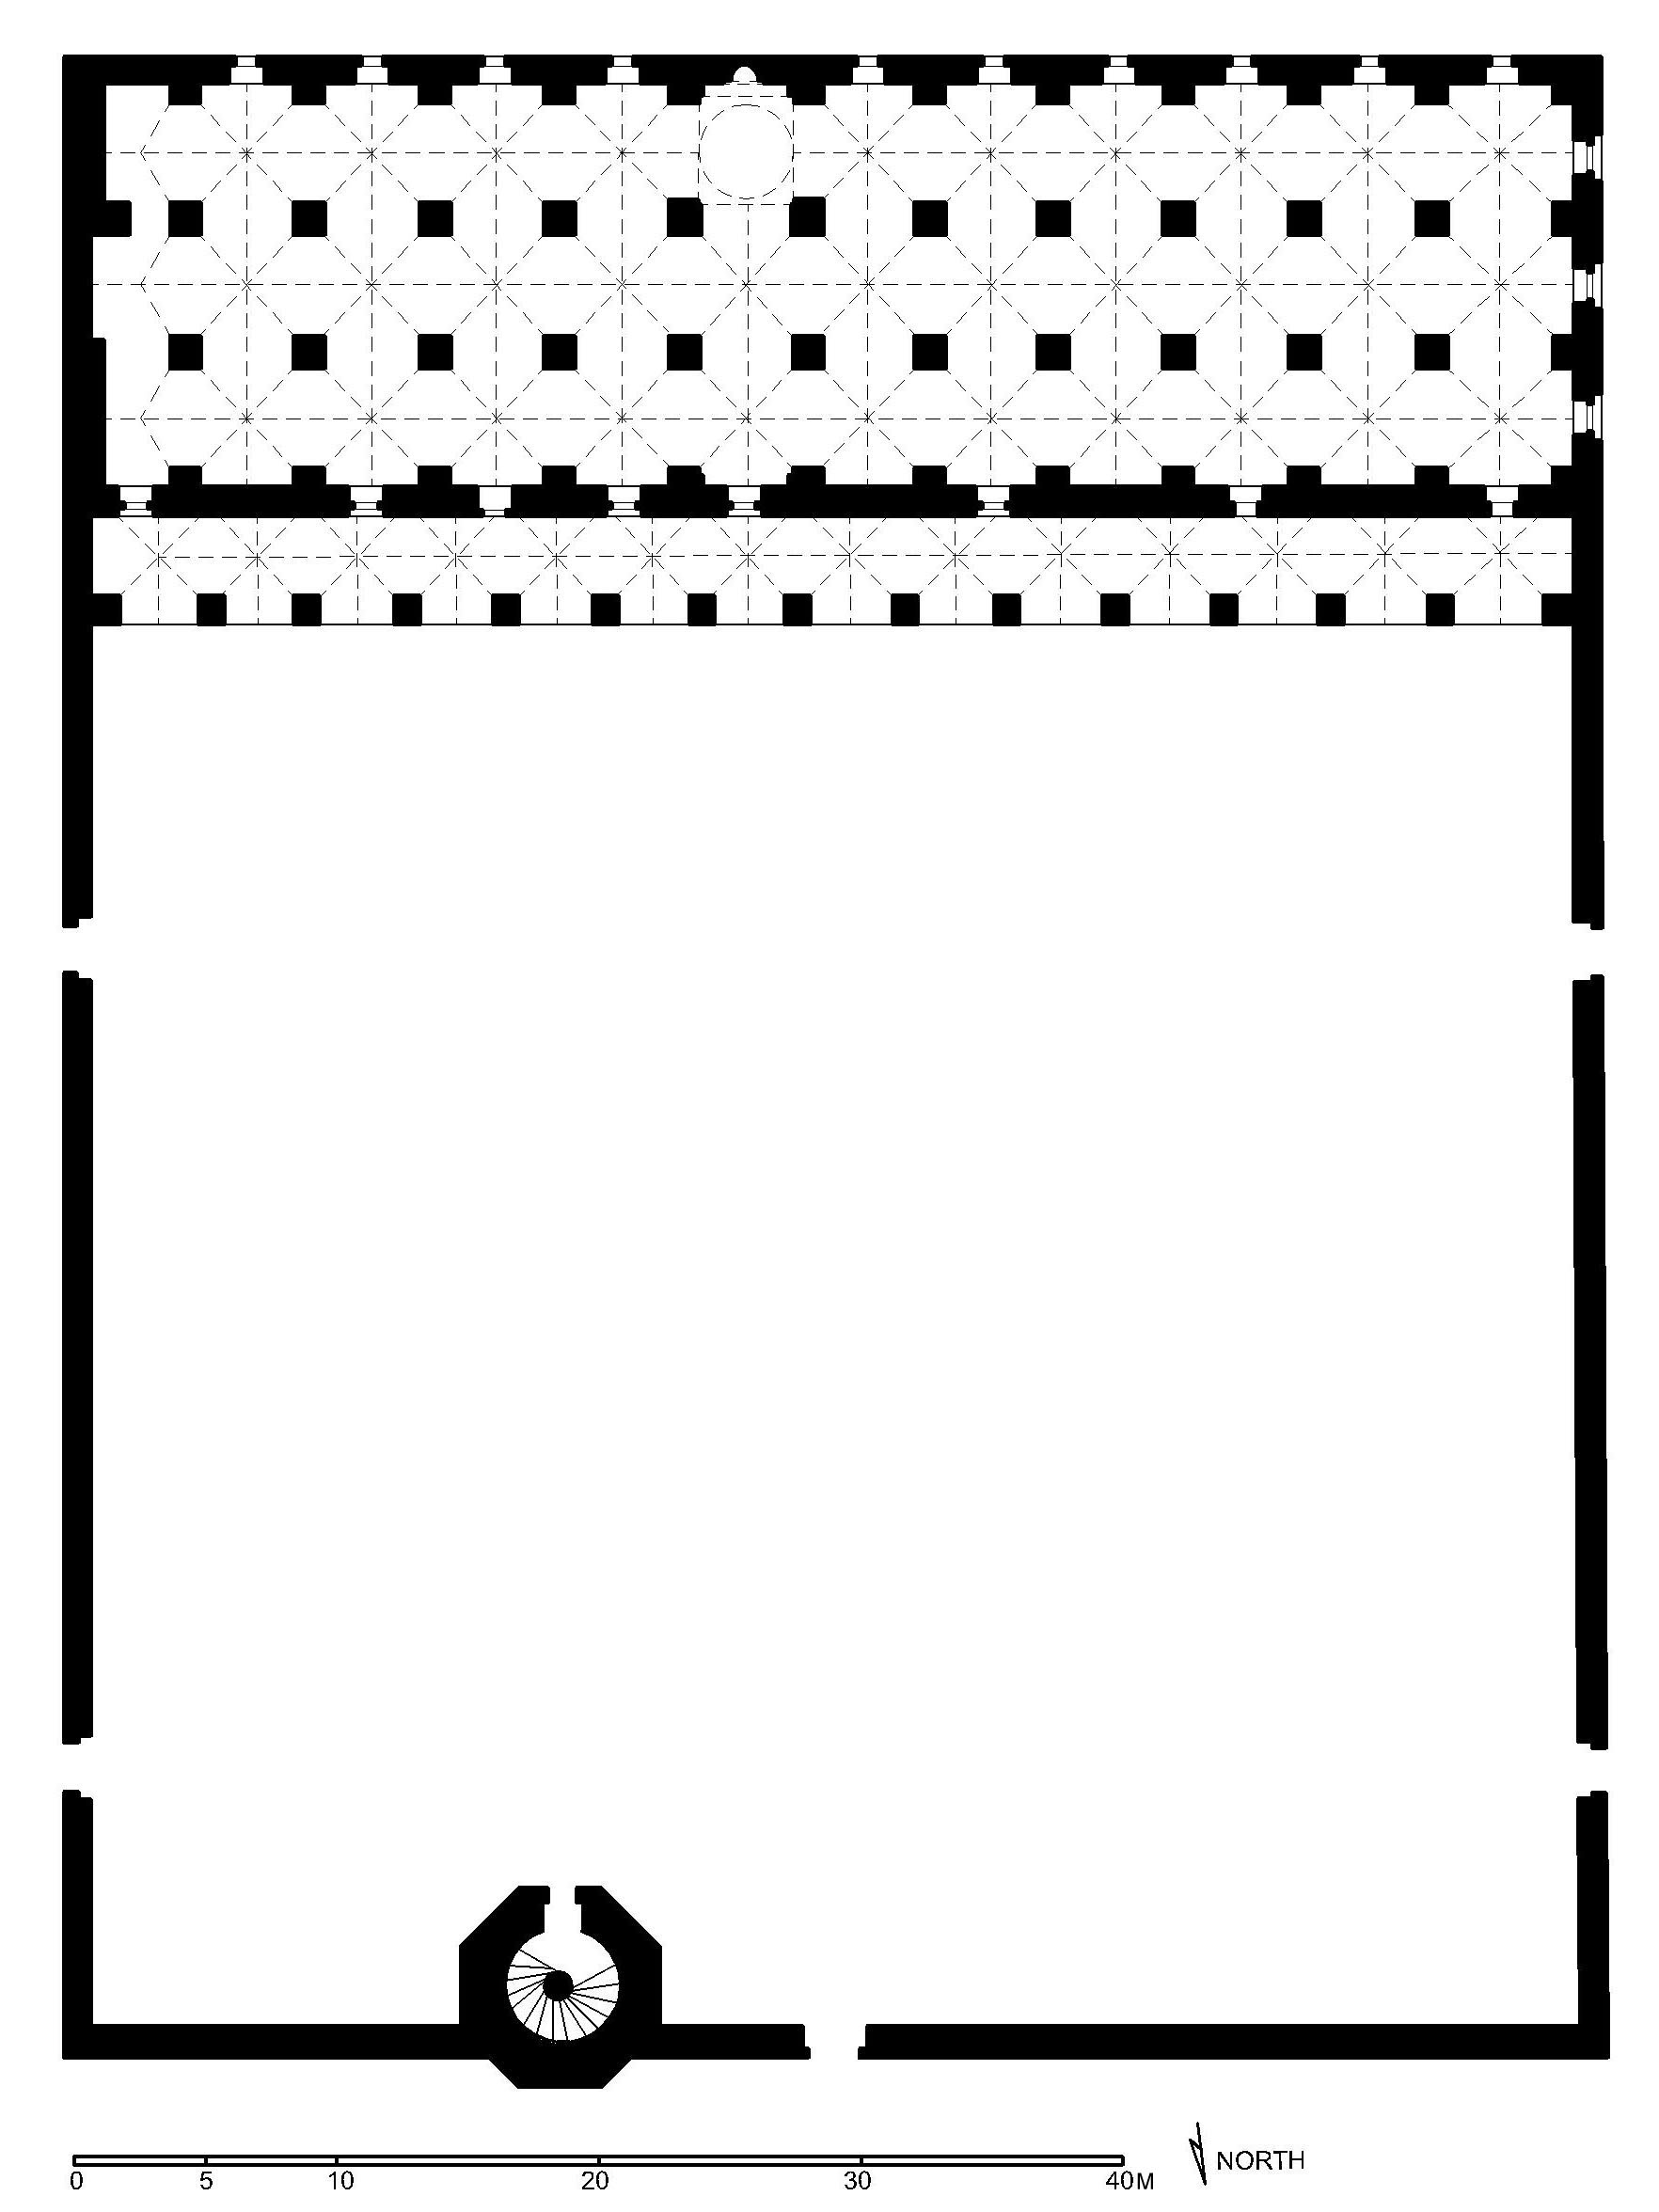 Urfa Ulu Camii - Floor plan of mosque (after Meinecke) in AutoCAD 2000 format. Click the download button to download a zipped file containing the .dwg file. 